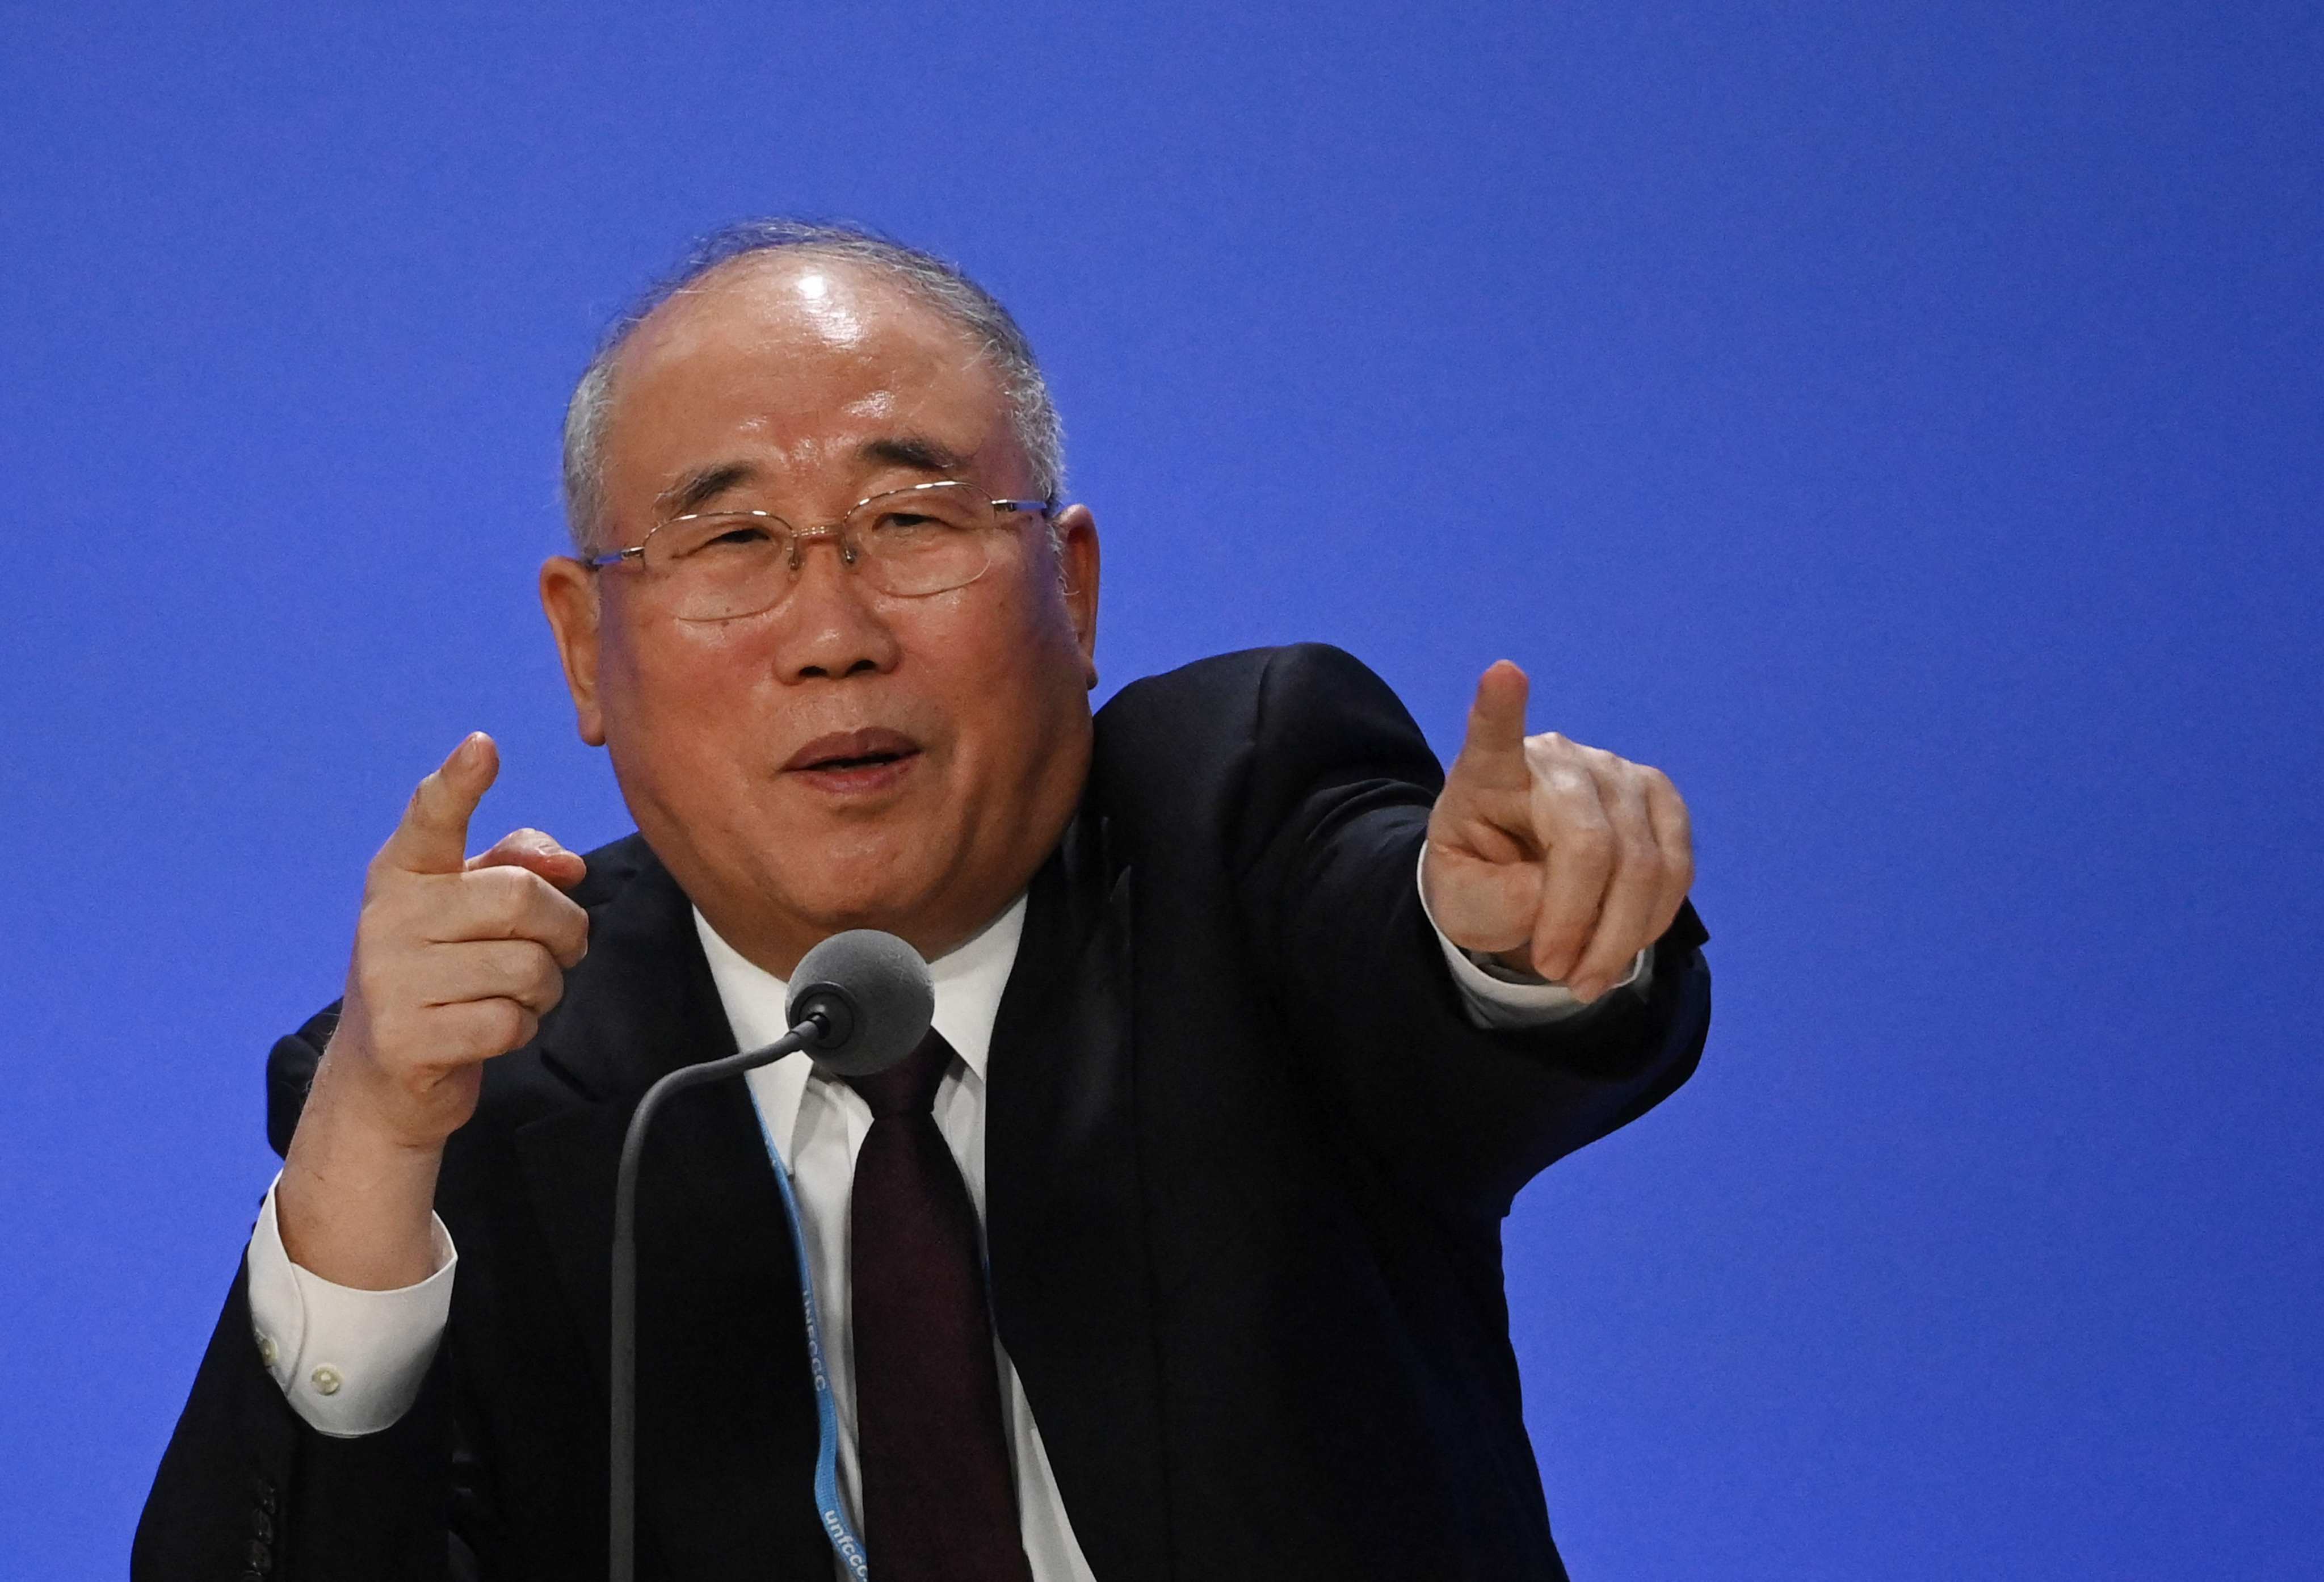 China’s special climate envoy Xie Zhenhua says developing countries have not fulfilled their financing pledge to combat climate change. Photo: AFP